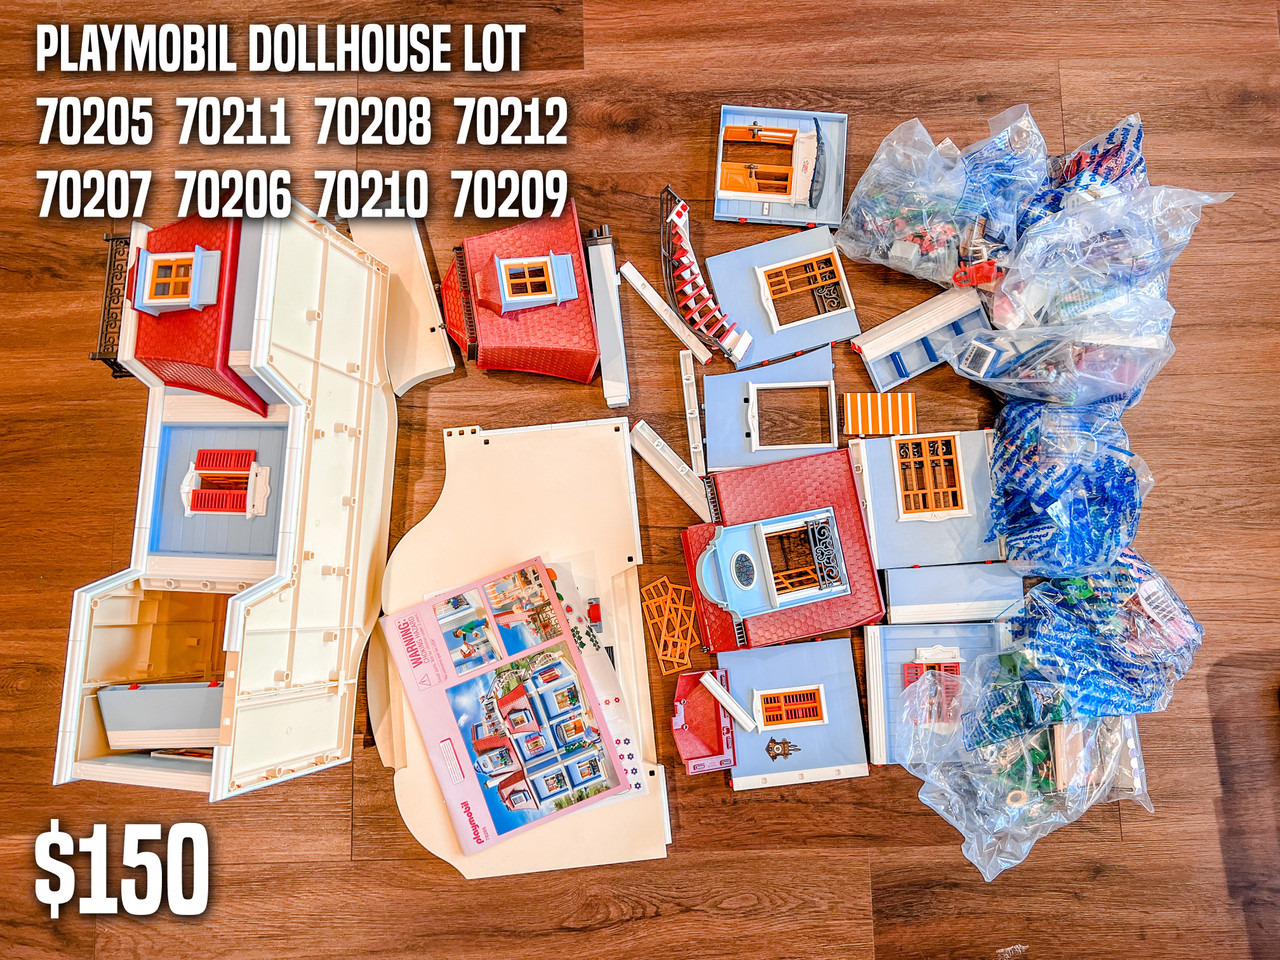 Playmobil unboxing : The Dollhouse (2019) - 70205, 70206, 70207, 70208  70212 